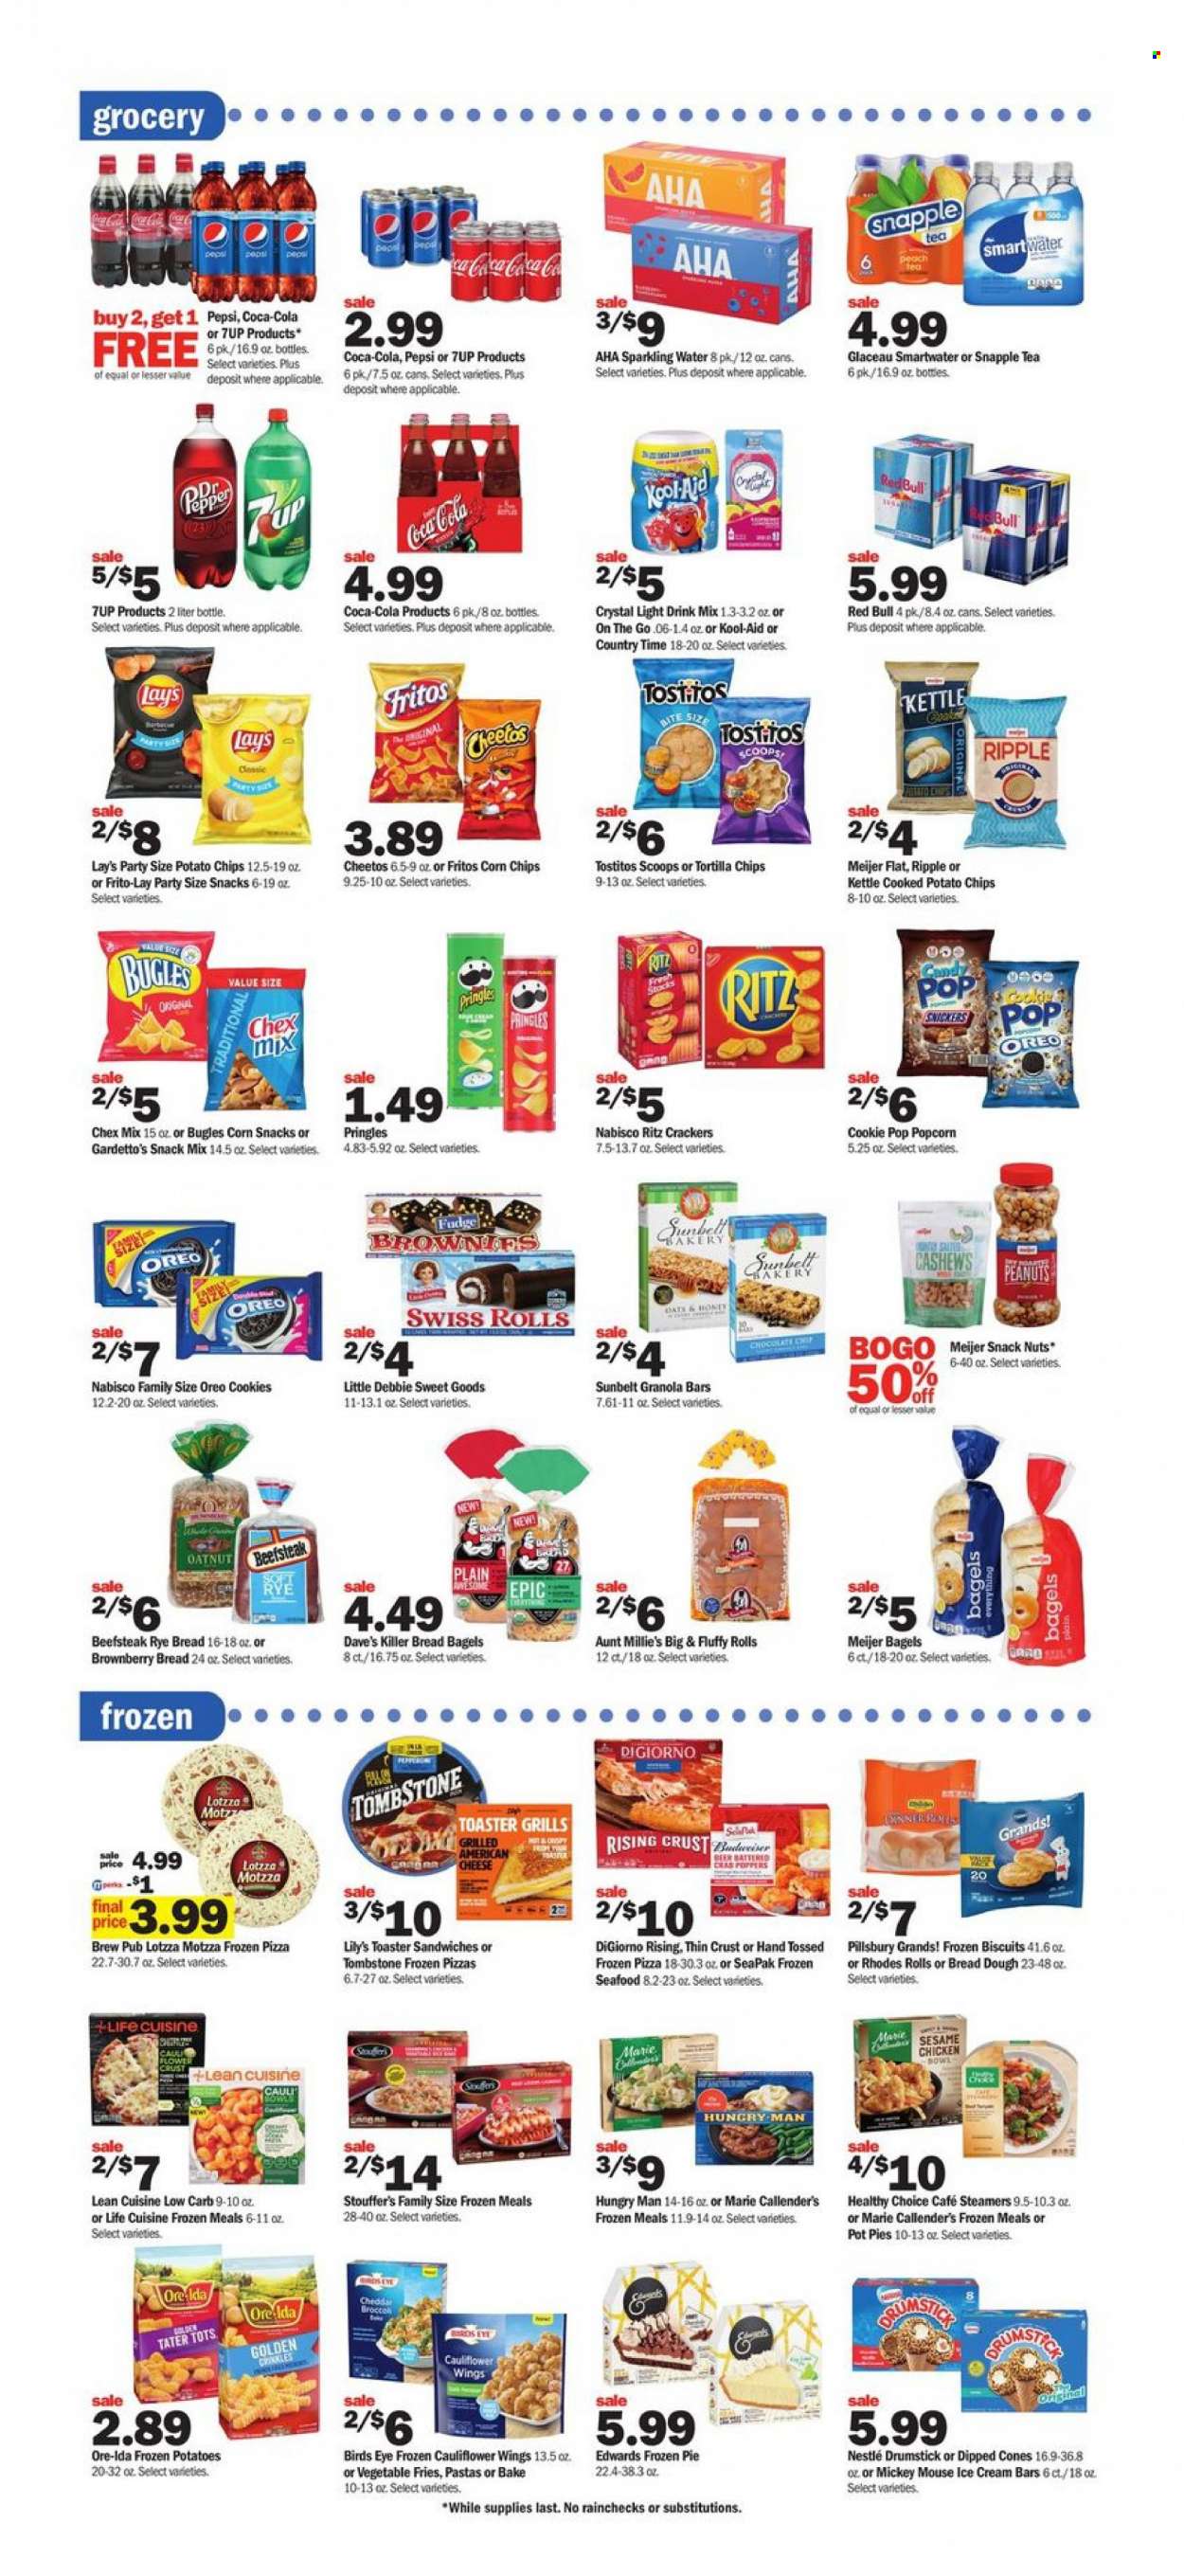 thumbnail - Meijer Flyer - 12/12/2021 - 12/18/2021 - Sales products - bagels, bread, pie, pot pie, seafood, pizza, sandwich, Pillsbury, Bird's Eye, Lean Cuisine, Healthy Choice, Marie Callender's, american cheese, Oreo, bread dough, ice cream, ice cream bars, Mickey Mouse, veggie fries, Stouffer's, Ore-Ida, tater tots, cookies, Nestlé, snack, crackers, biscuit, RITZ, Fritos, tortilla chips, potato chips, Pringles, Cheetos, Lay’s, corn chips, popcorn, Frito-Lay, Tostitos, Chex Mix, granola bar, cashews, peanuts, Coca-Cola, Pepsi, 7UP, Red Bull, Snapple, Country Time, sparkling water, Smartwater, tea, toaster. Page 6.